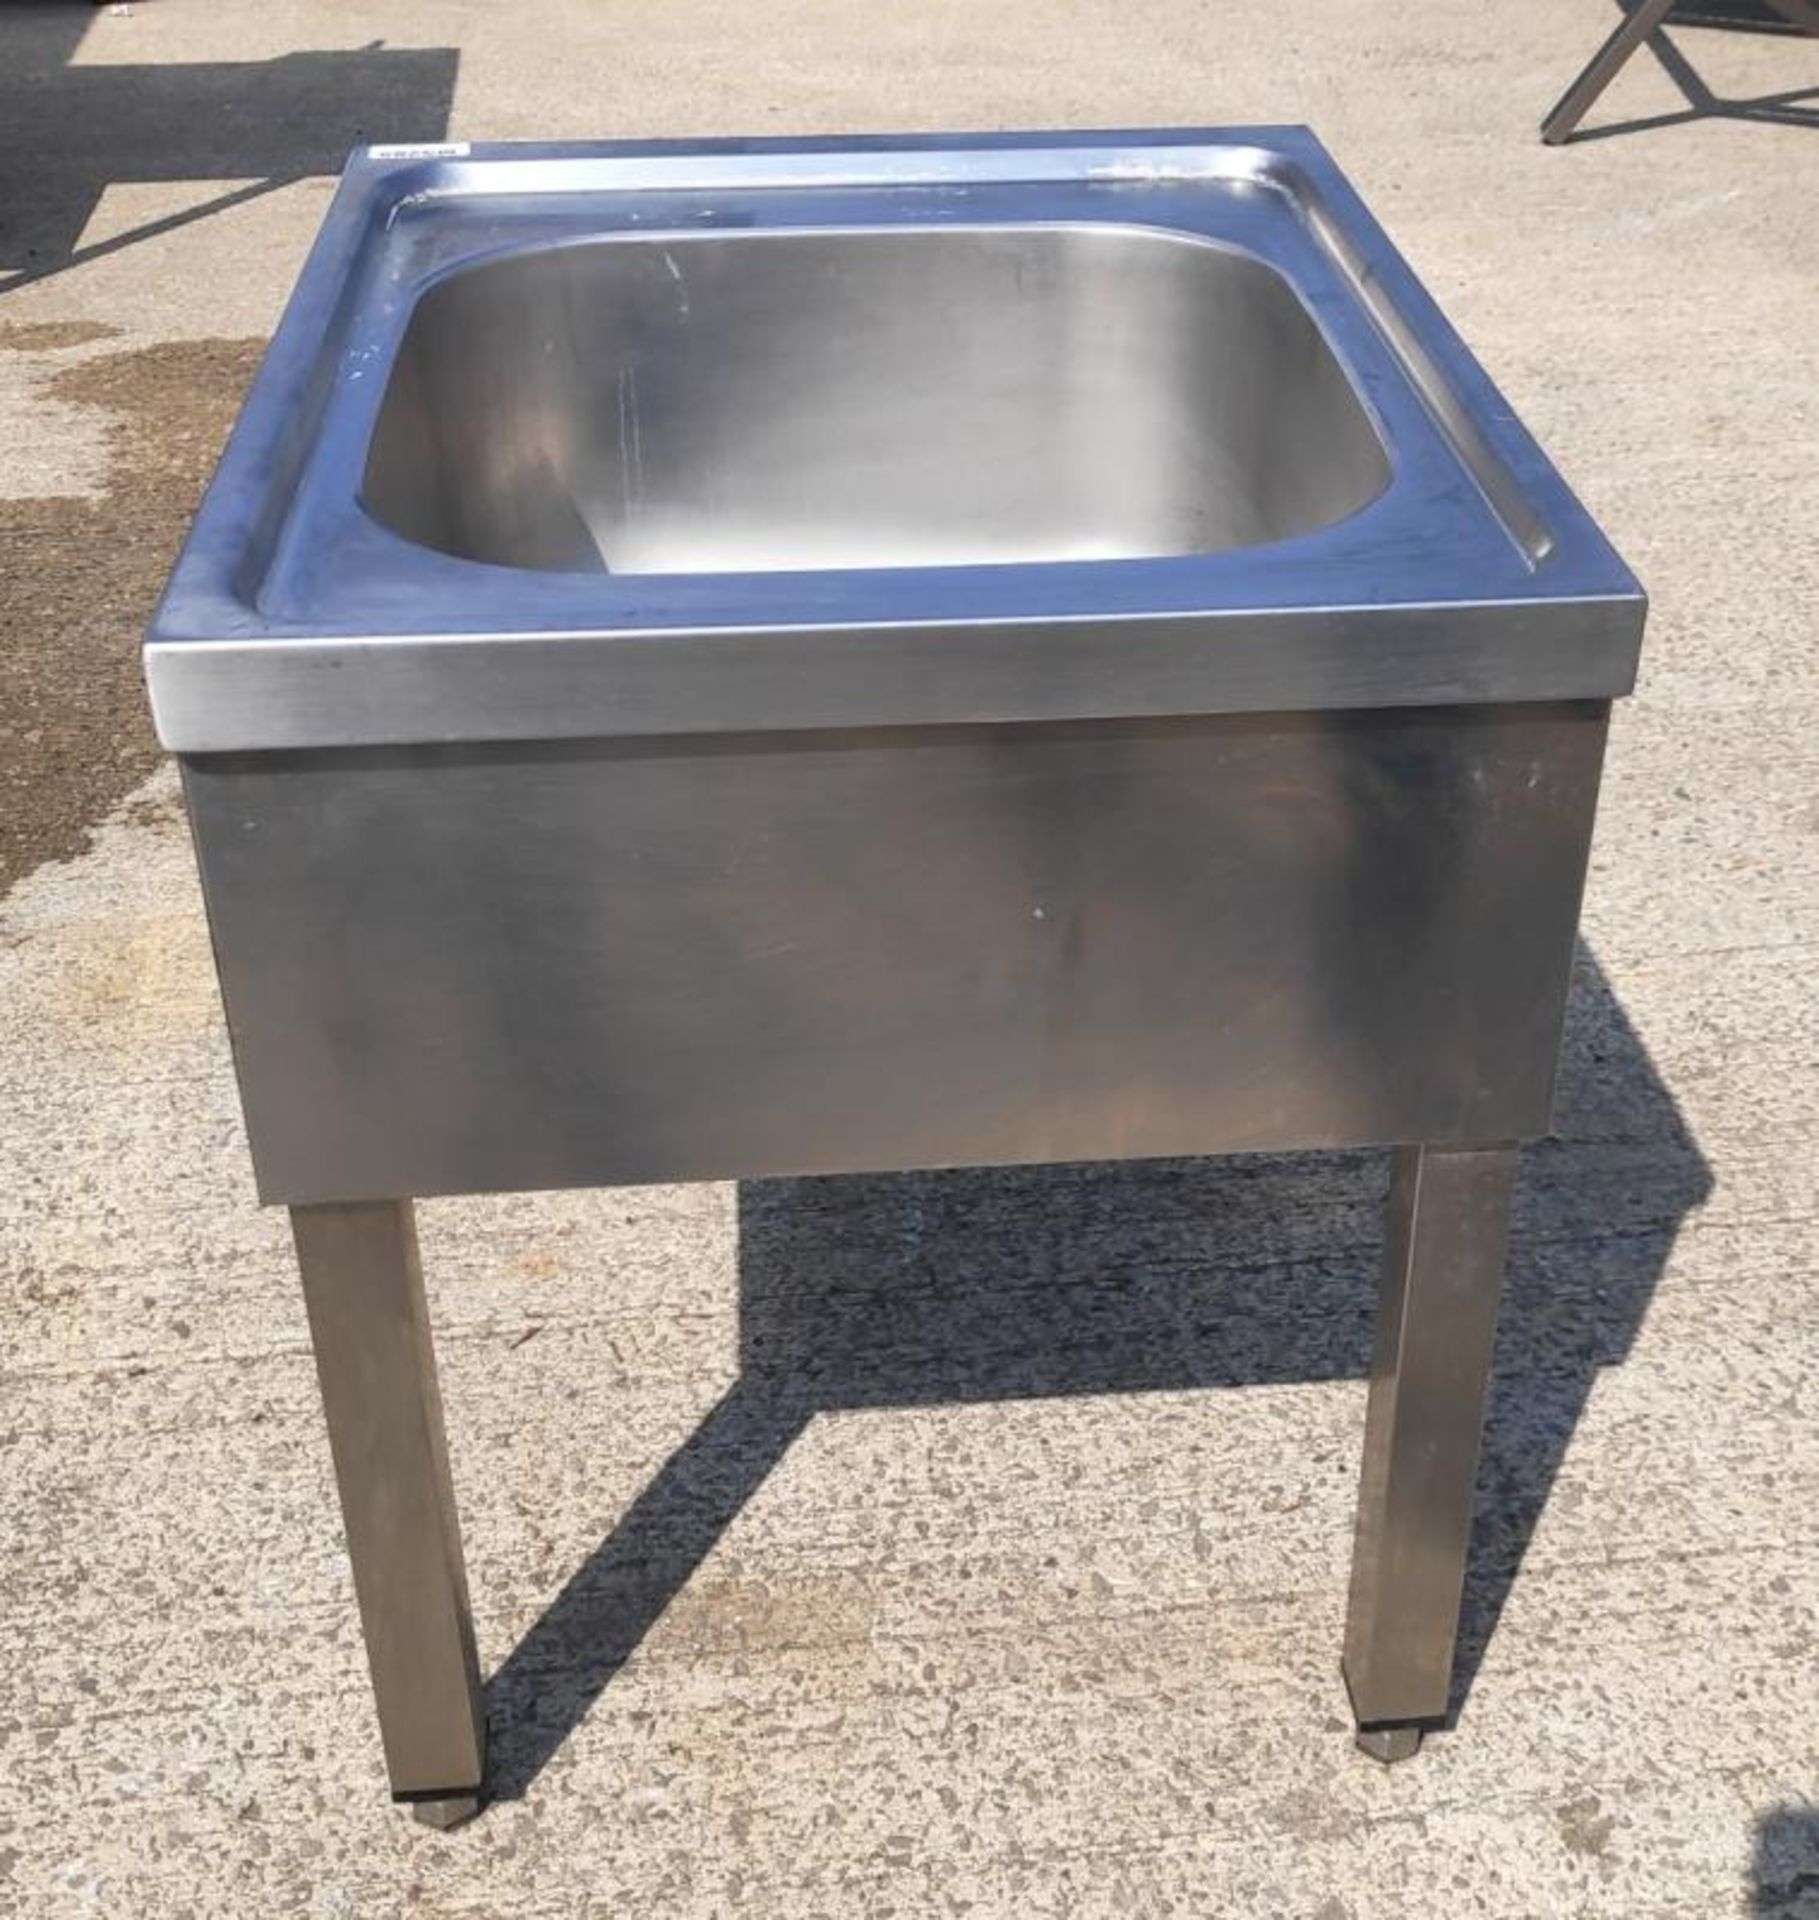 1 x Low Stainless Steel Commercial Kitchen Sink Unit - Dimensions: 50W x 60D x 60H cm - Very Recentl - Image 6 of 6